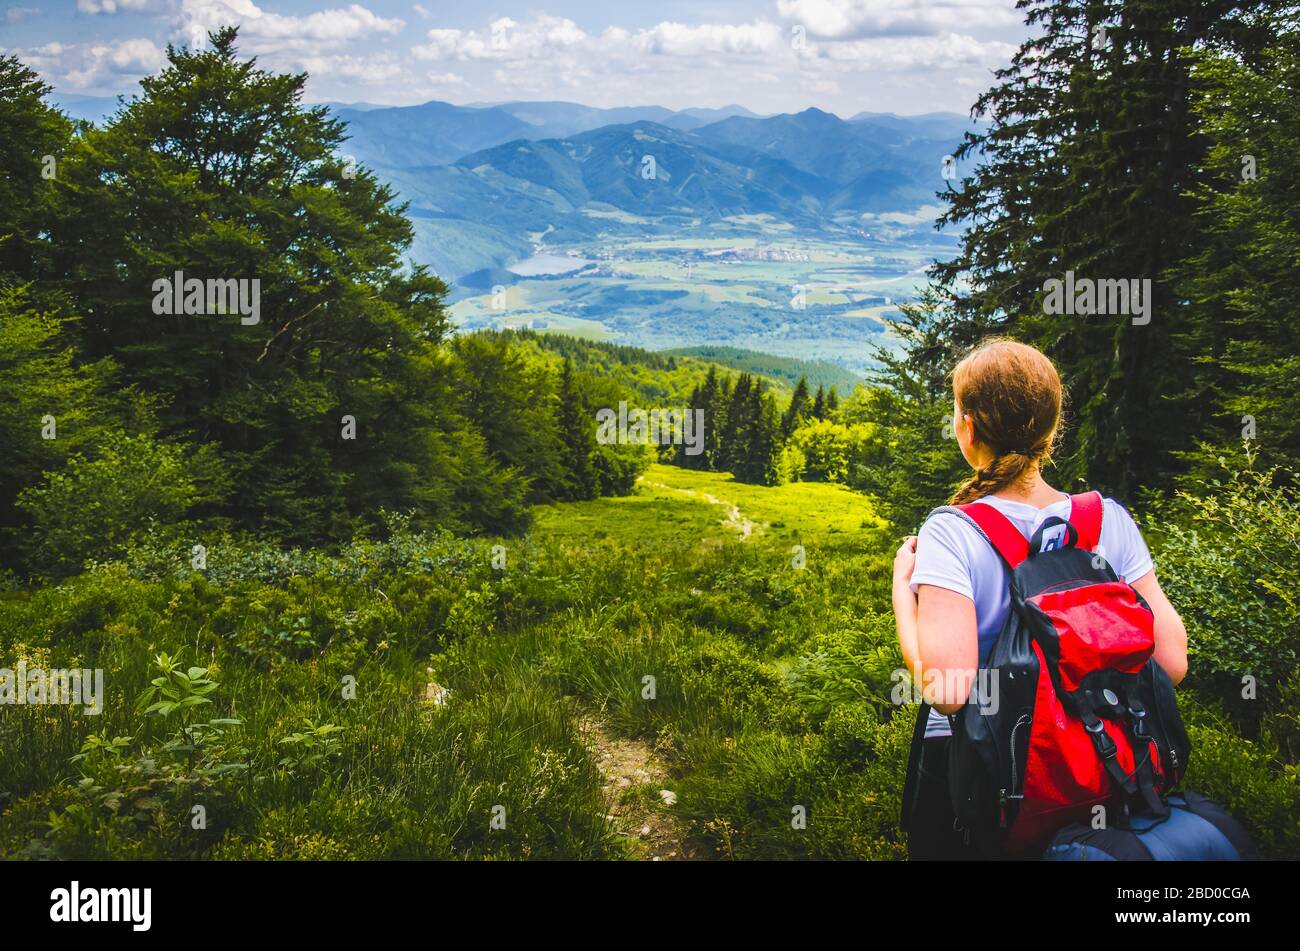 Alone female tourist with red rucksack walking up hill in green mountains under blue sky Stock Photo